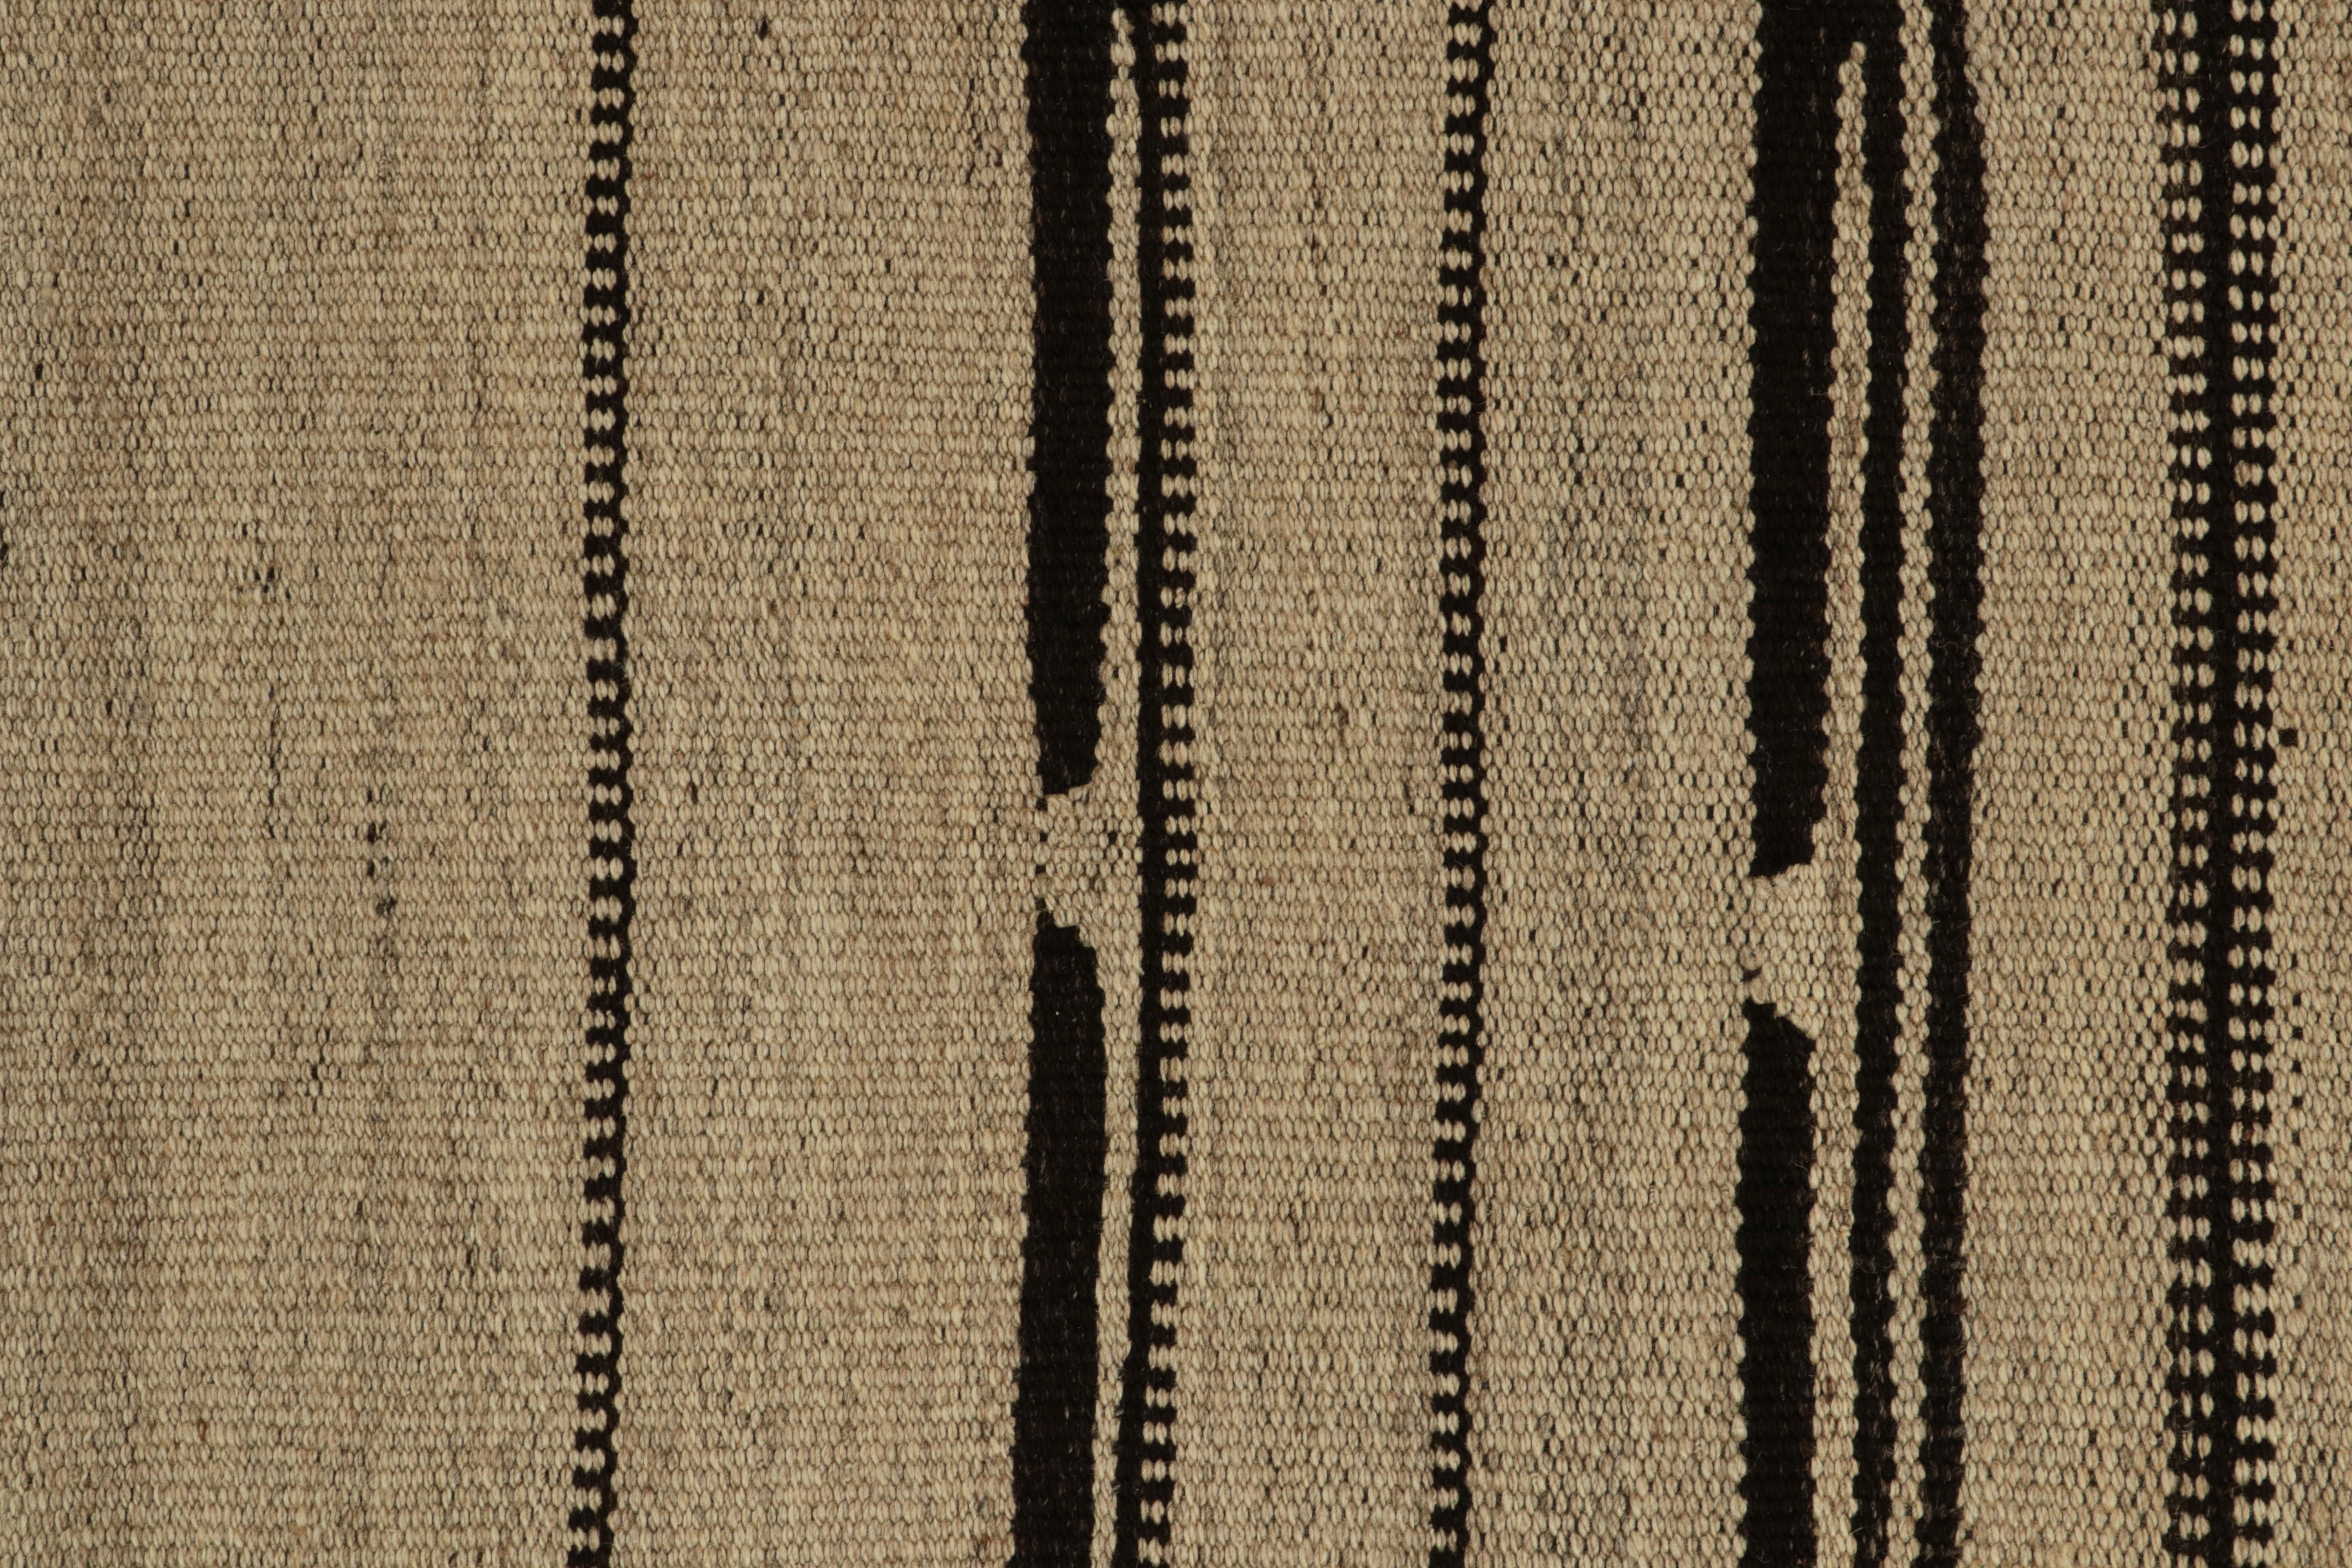 1950s Vintage Kilim Rug in Beige-Brown, Black Tribal Pattern by Rug & Kilim In Good Condition For Sale In Long Island City, NY